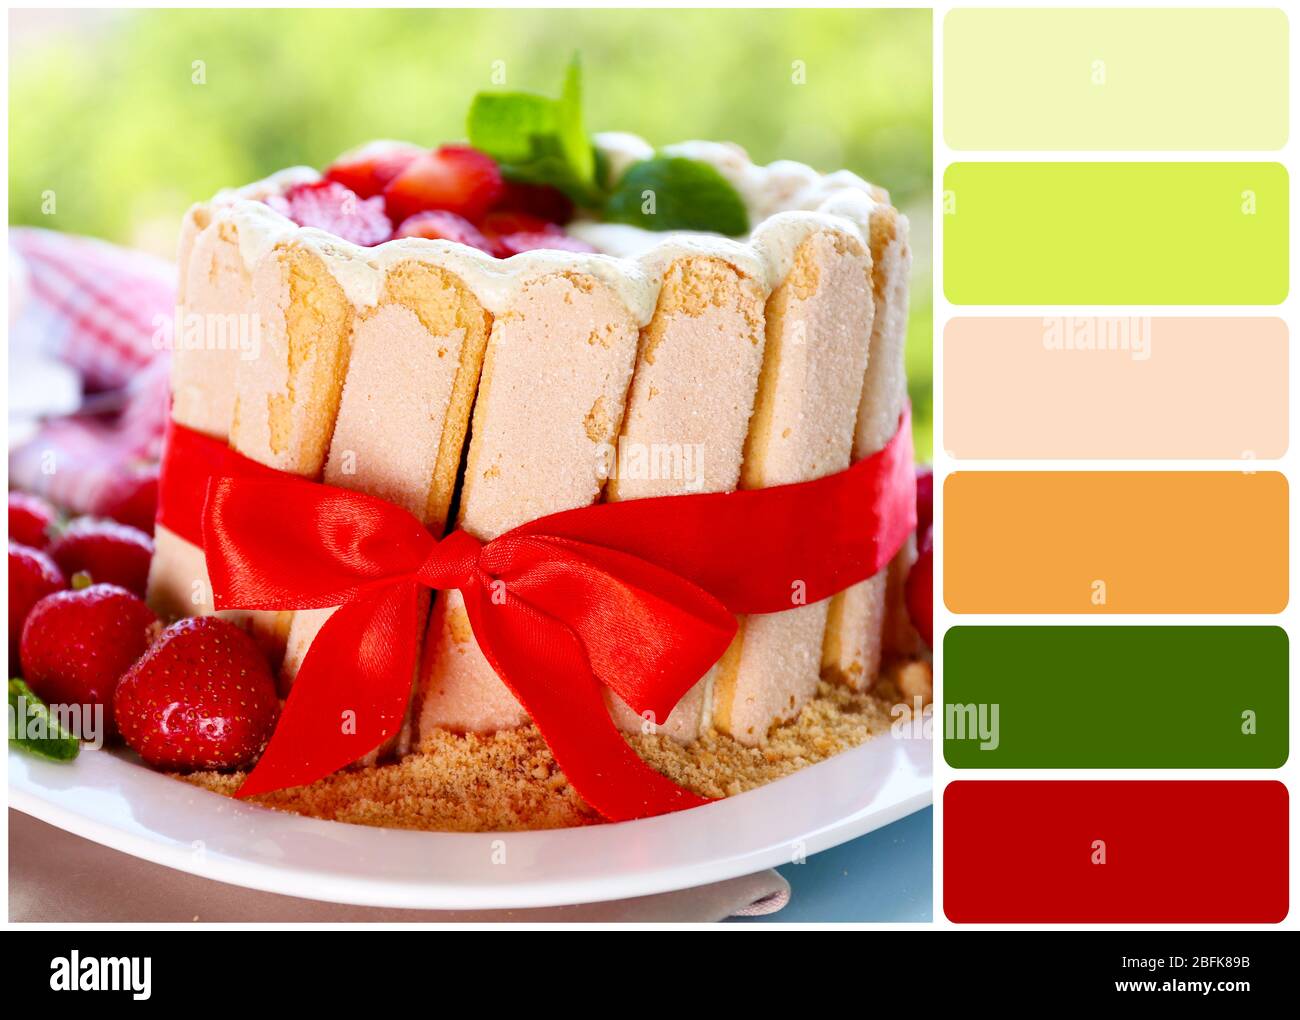 Tasty Cake Charlotte With Fresh Strawberries On Green Nature Background And Palette Of Colors Stock Photo Alamy